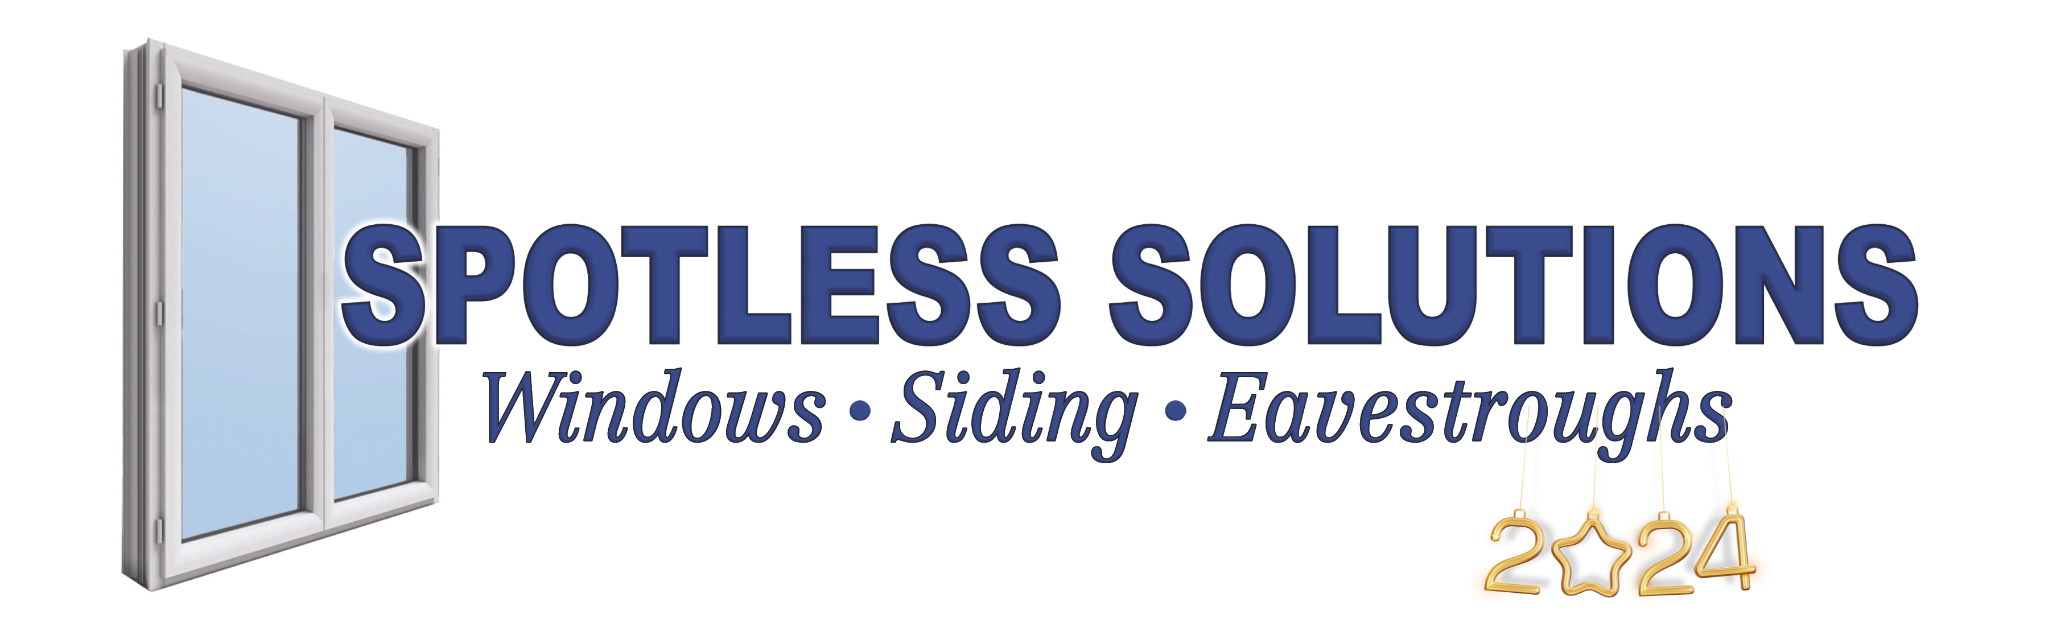 Spotless Solutions - Superior Window Cleaning Services